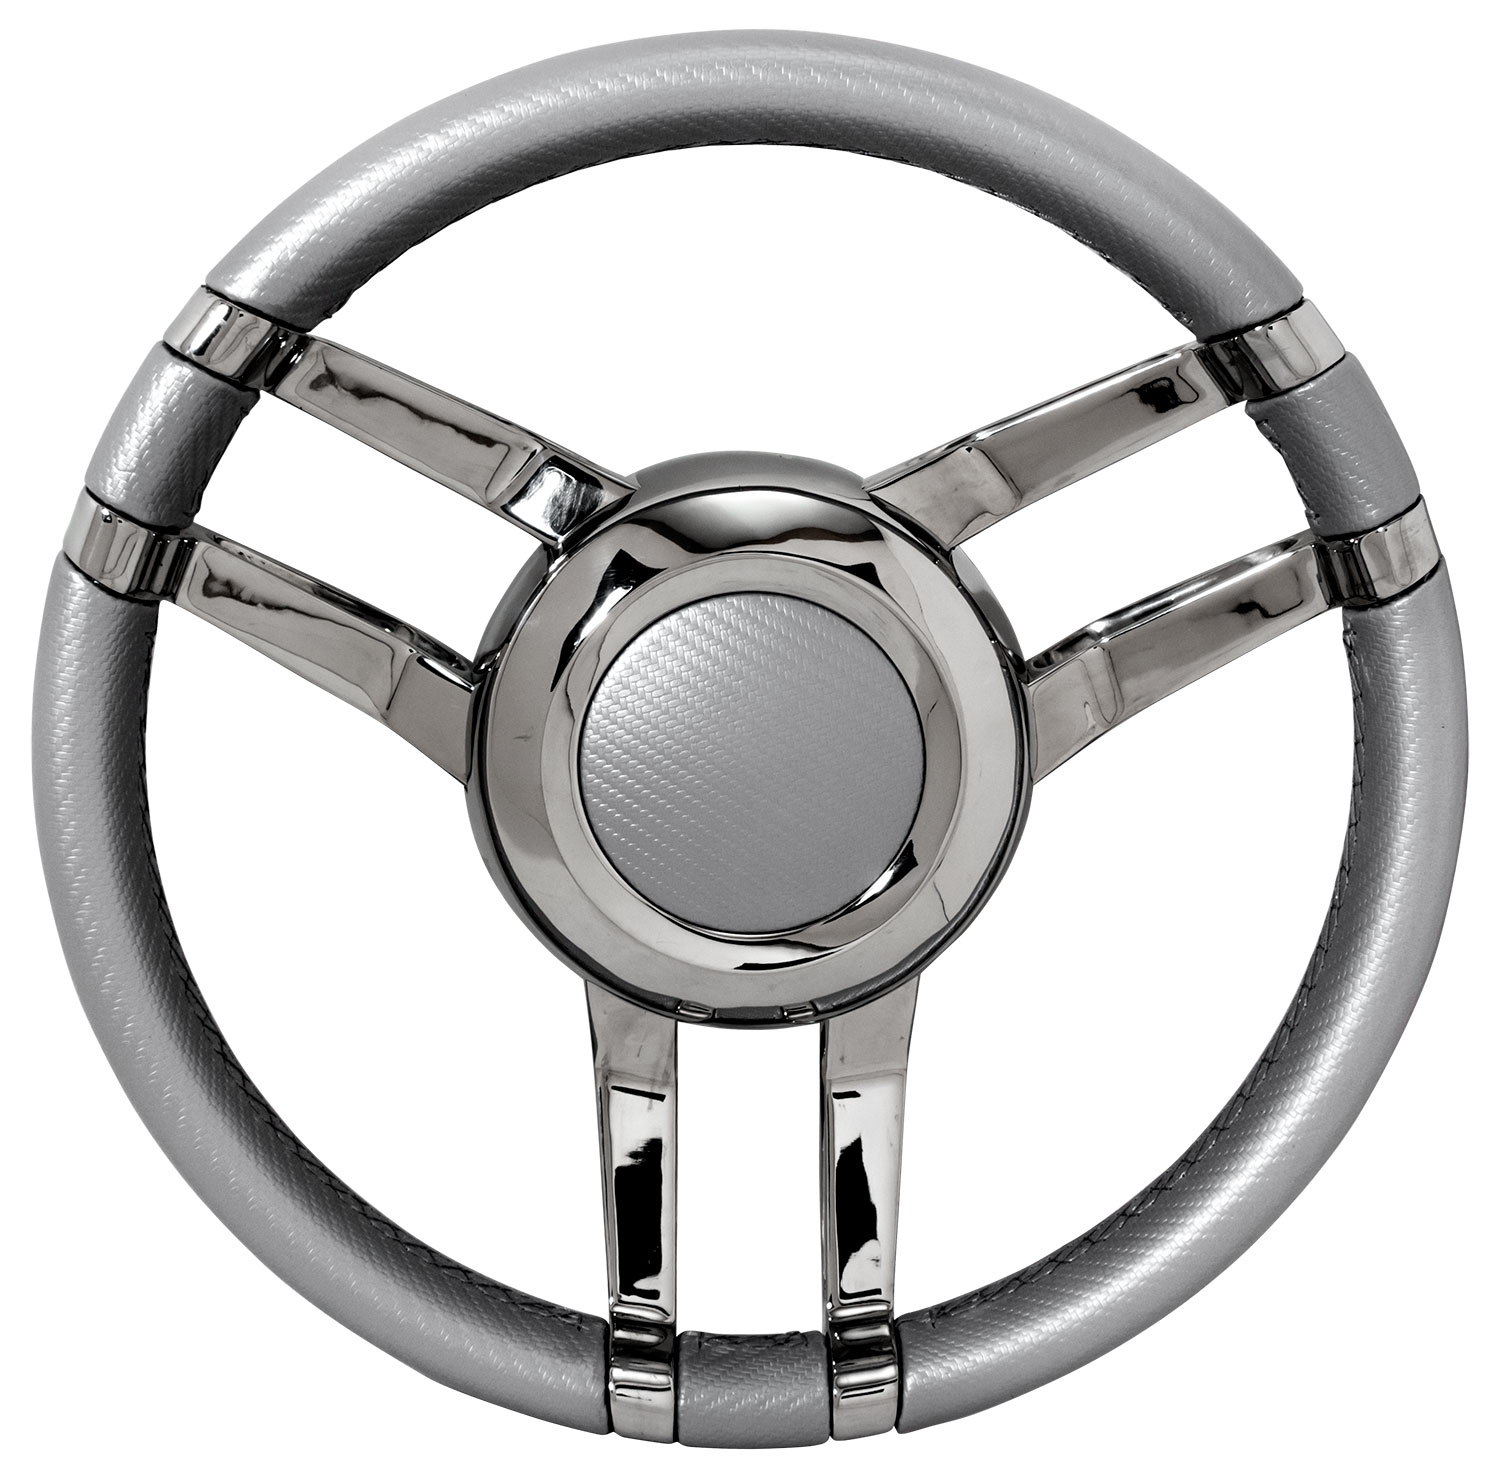 Detail Steering Wheel Pictures Nomer 5